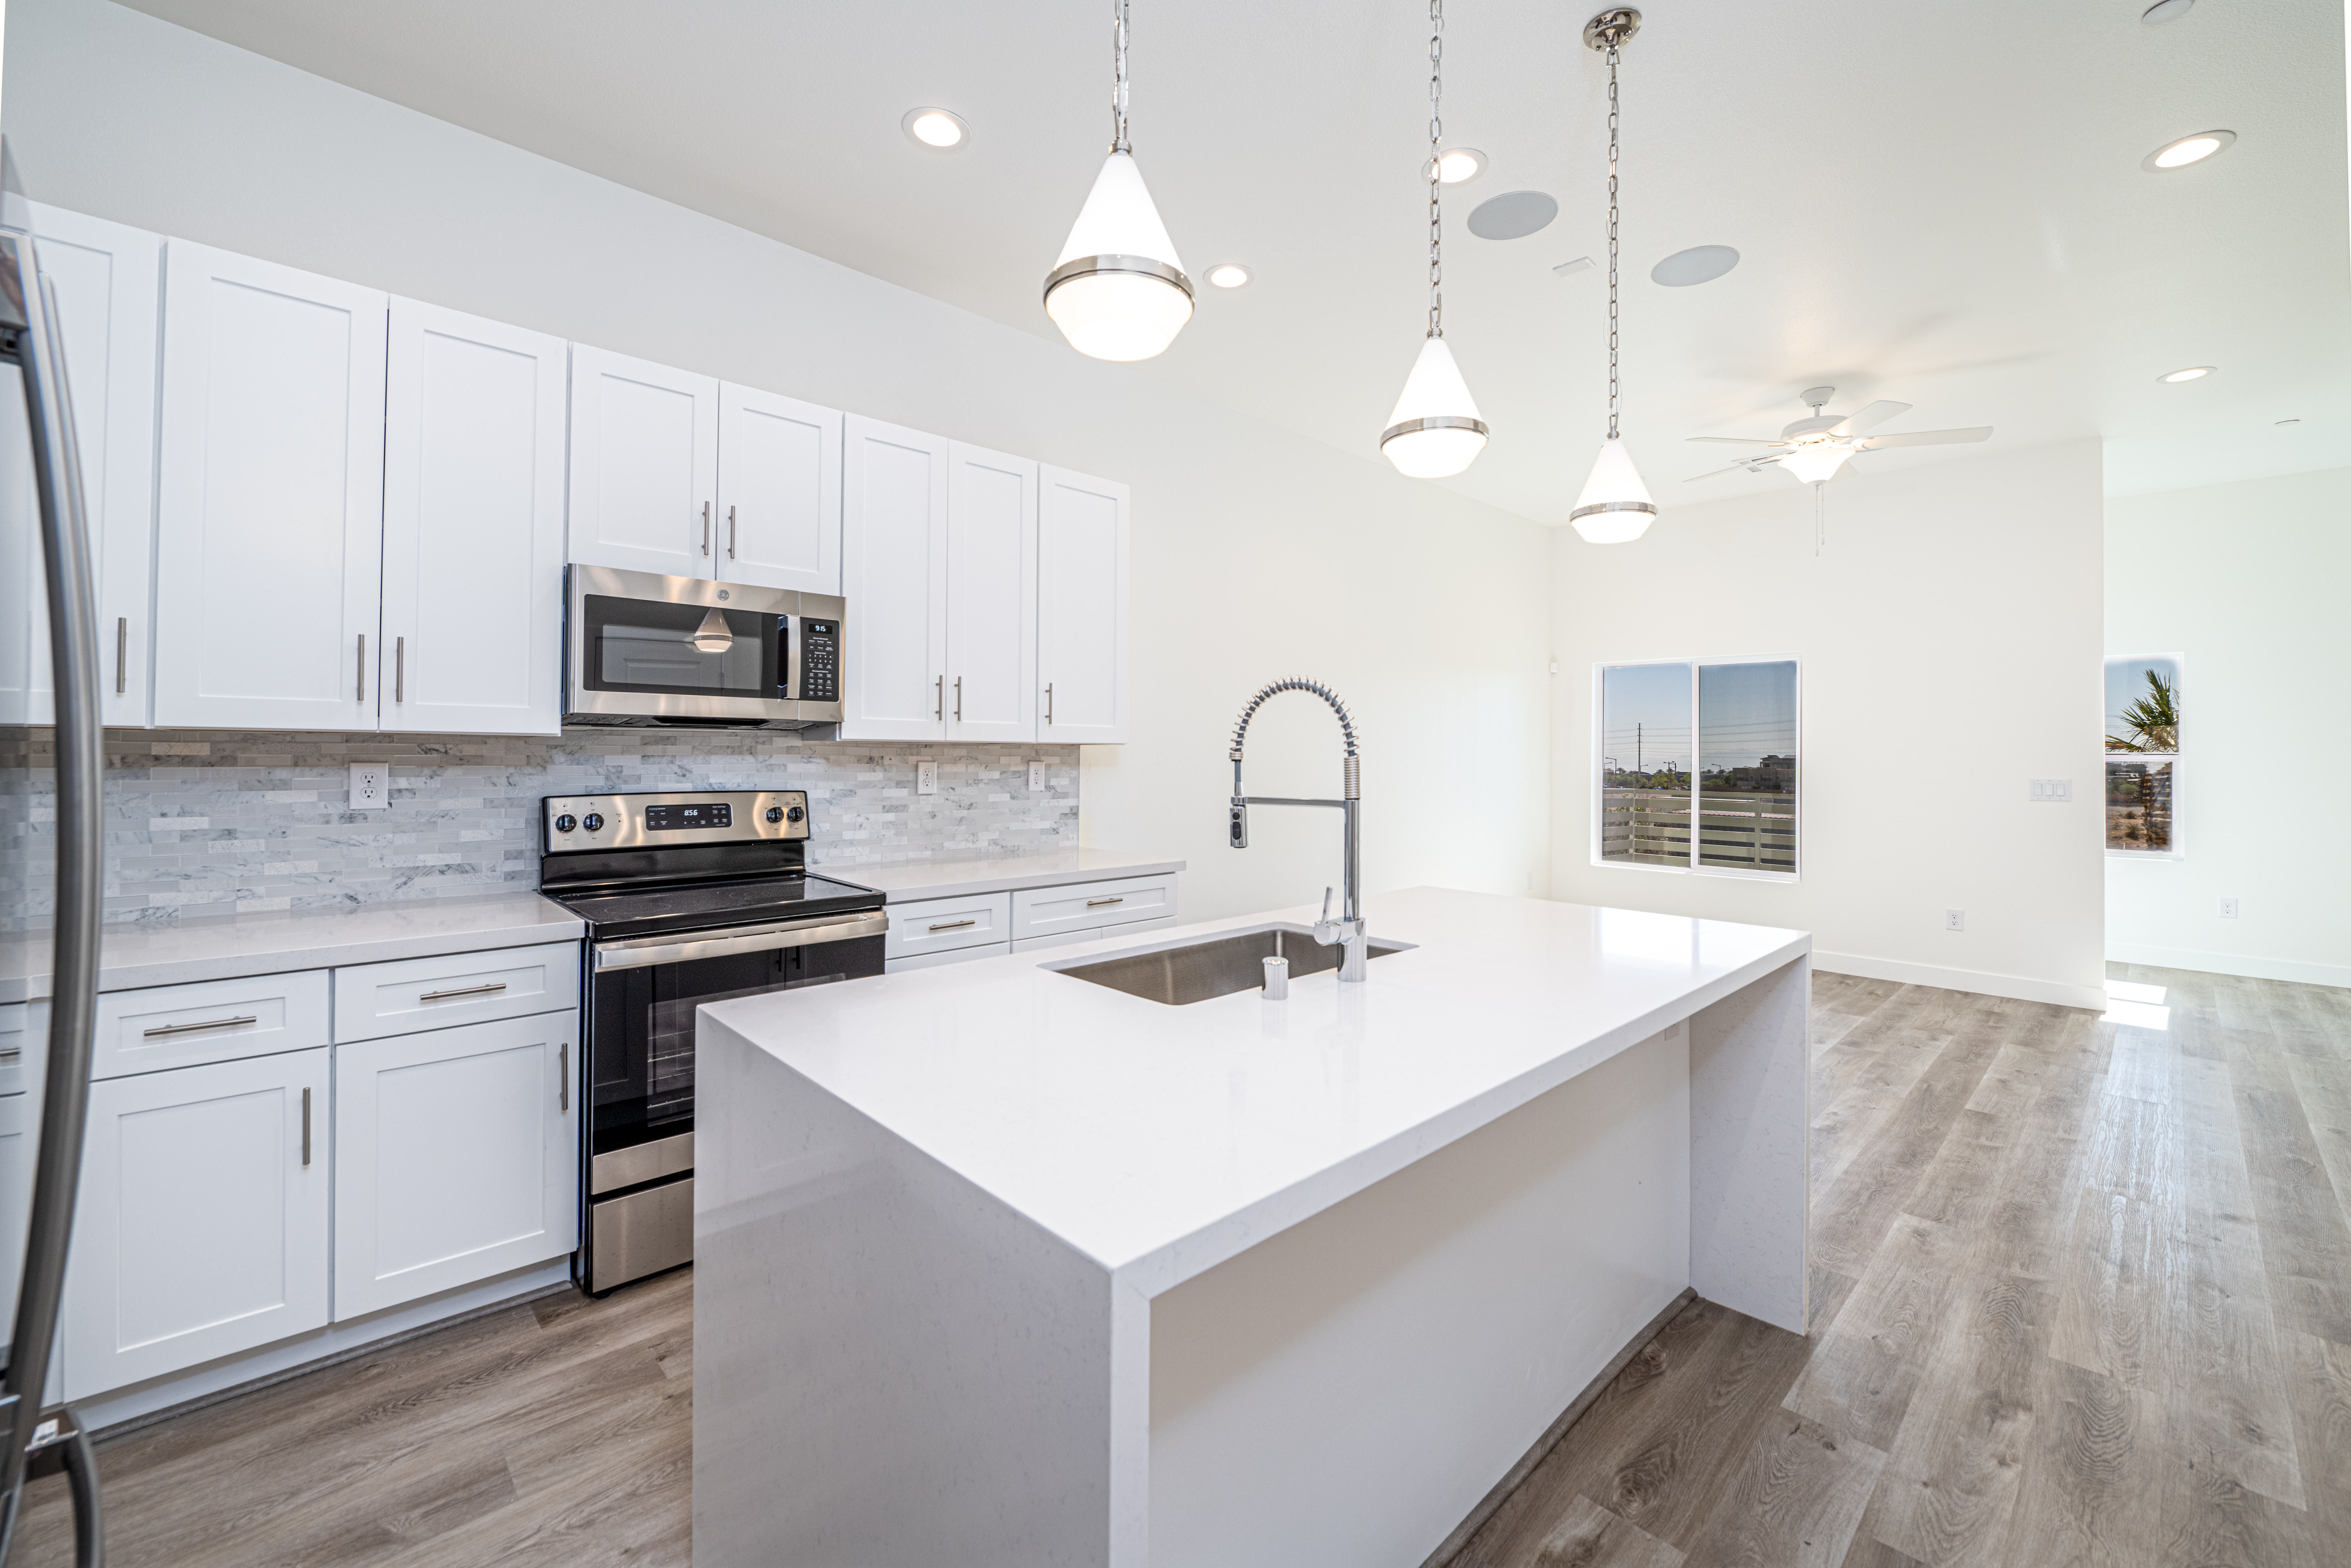 Kitchen of Unit B at Thrive by Edward Homes